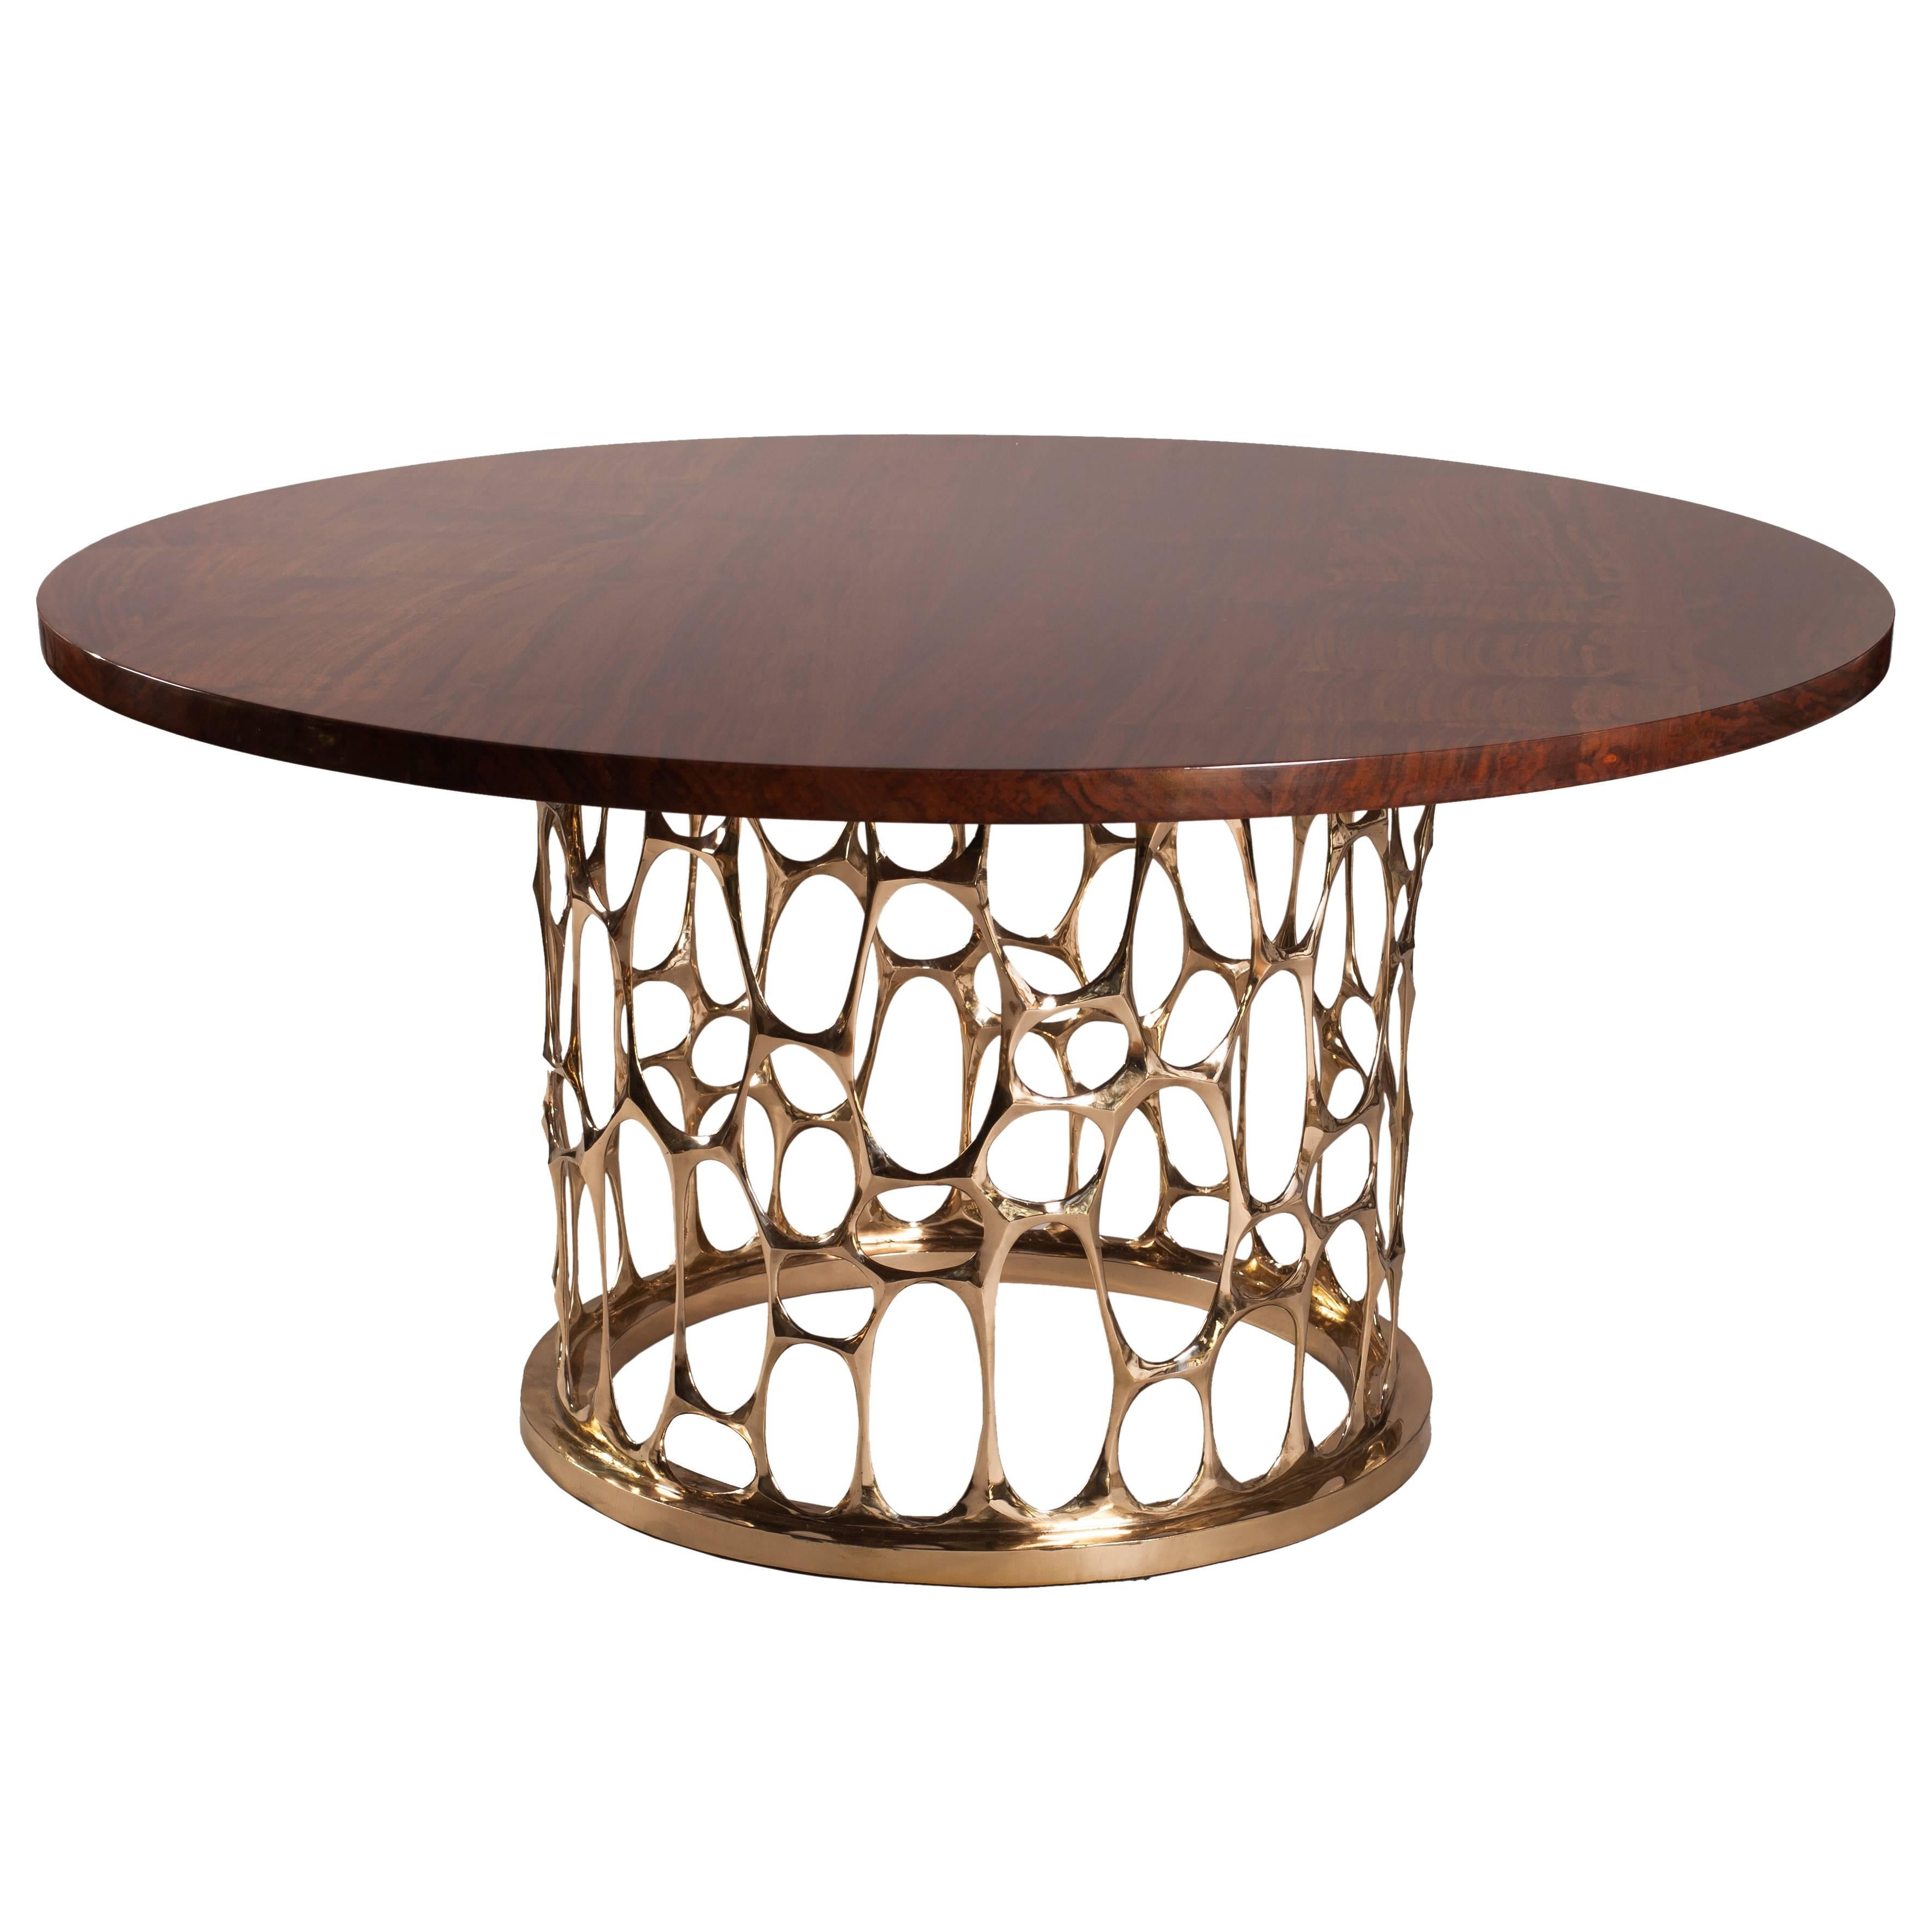 "Homage to Gaudi" Bronze Dining Table by Nick King